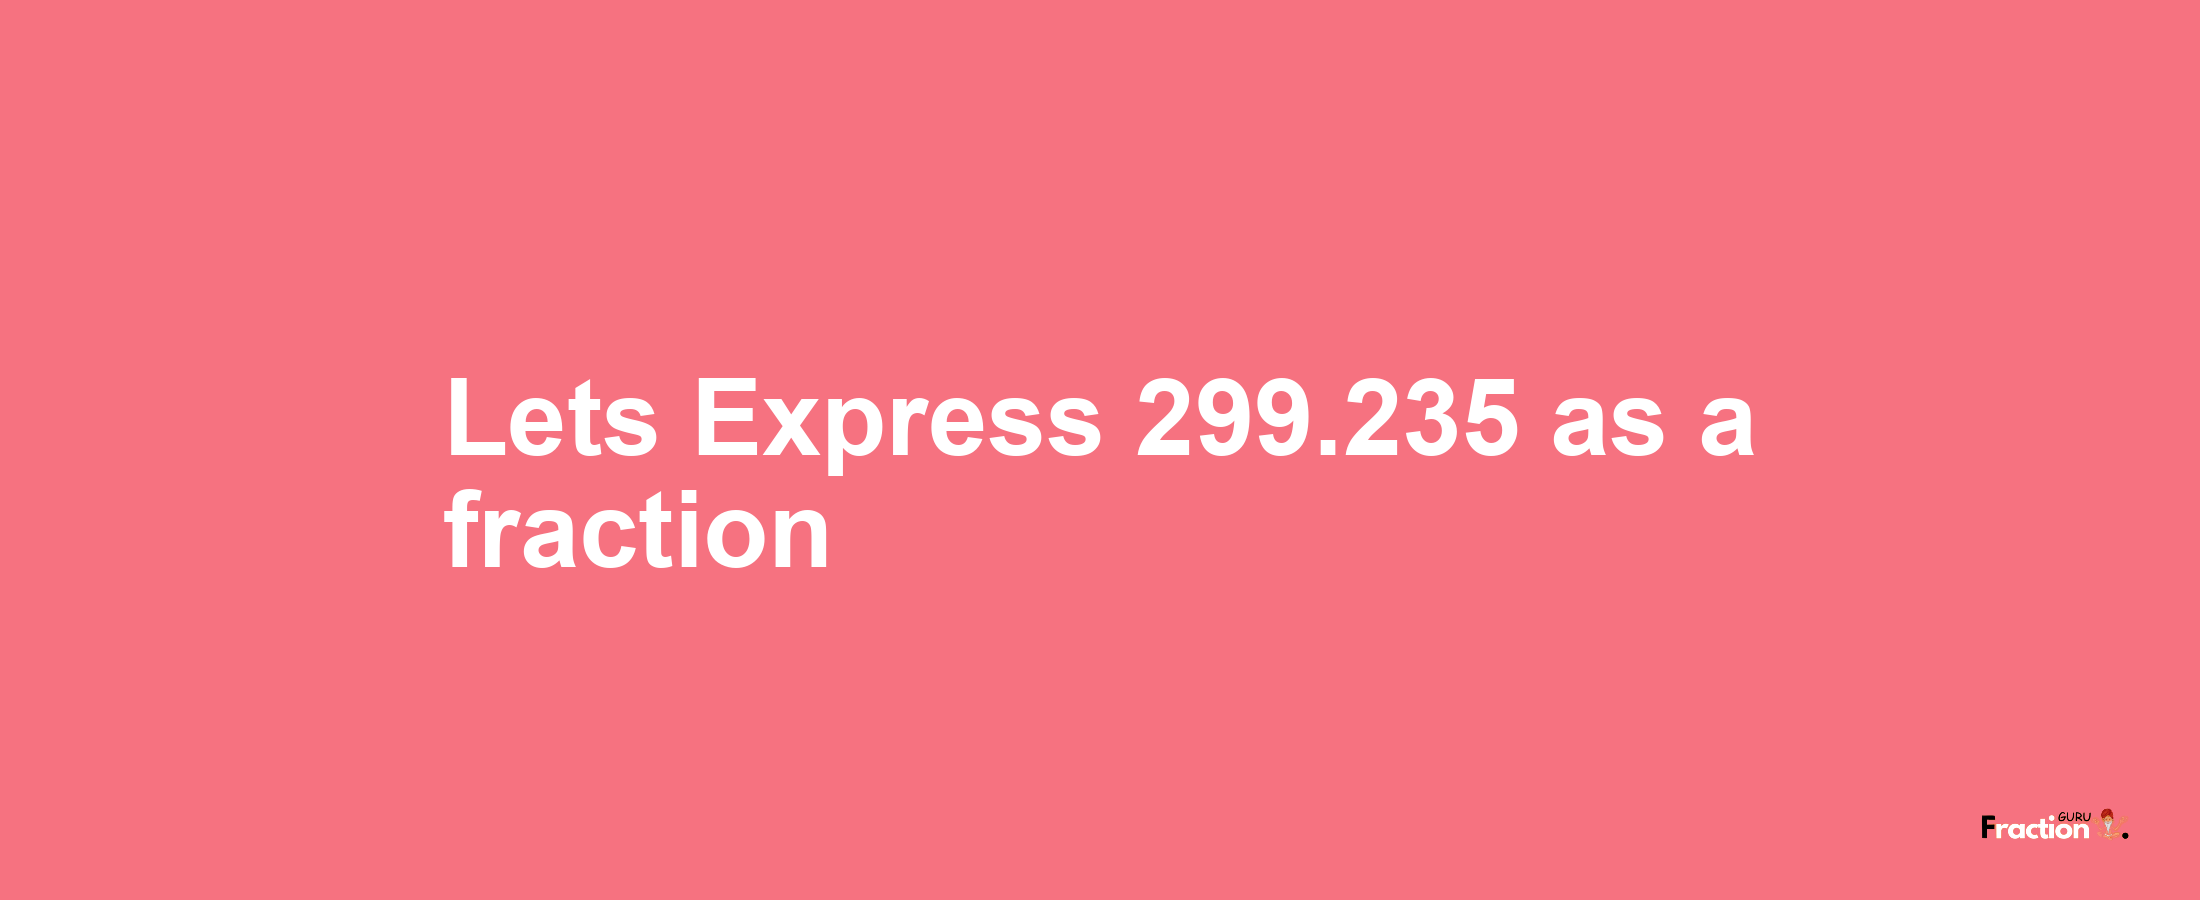 Lets Express 299.235 as afraction